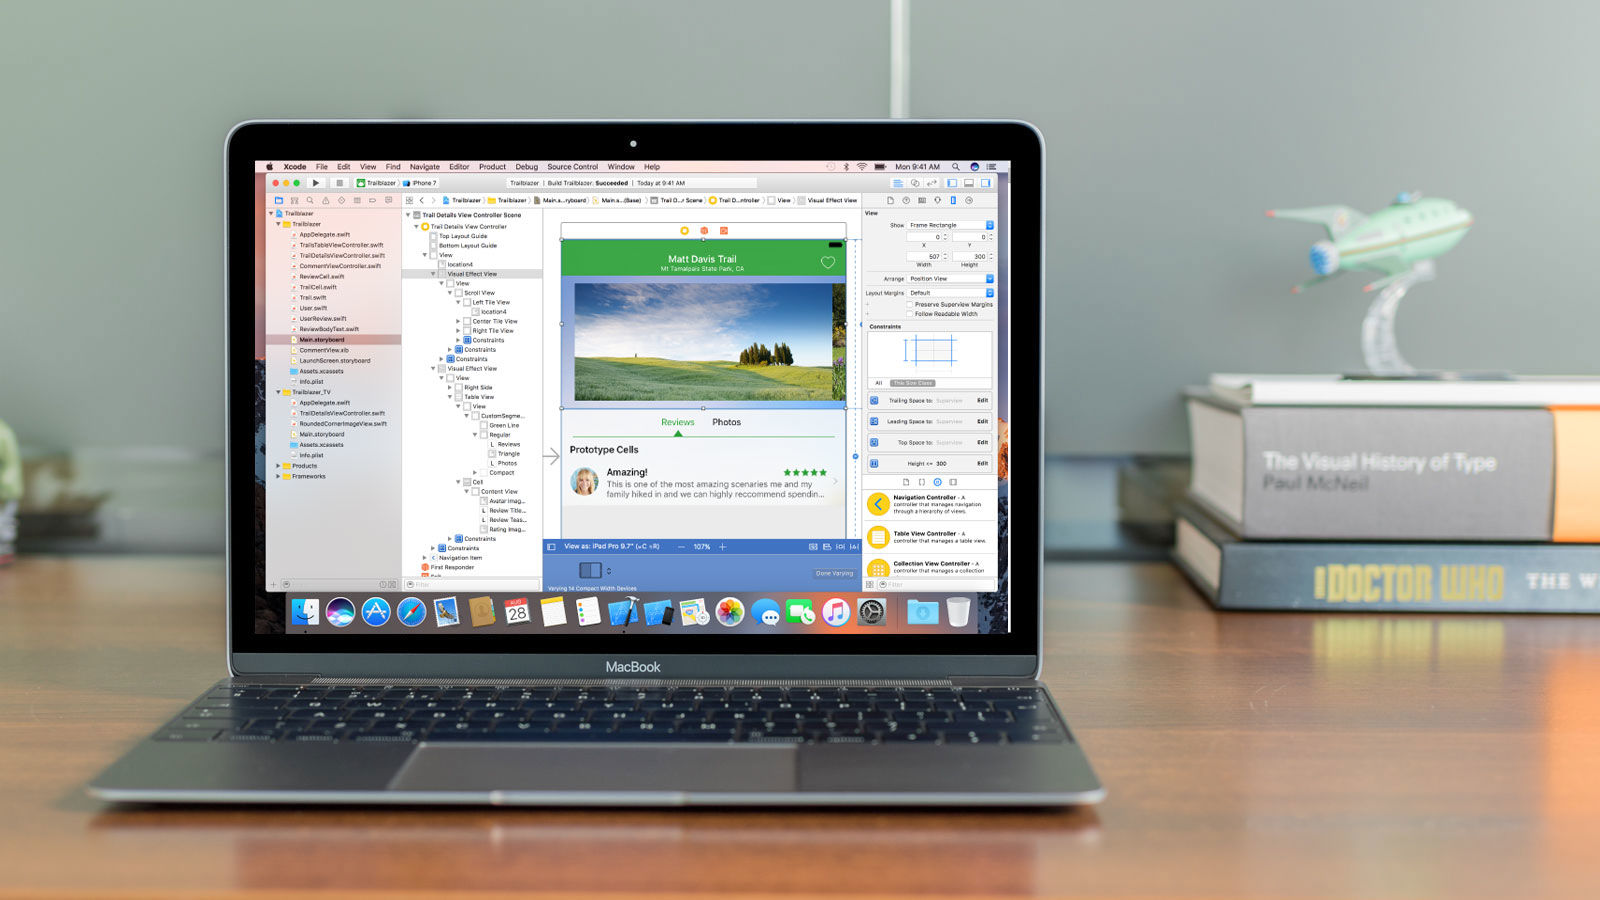 Best Mac To Buy For Software Development